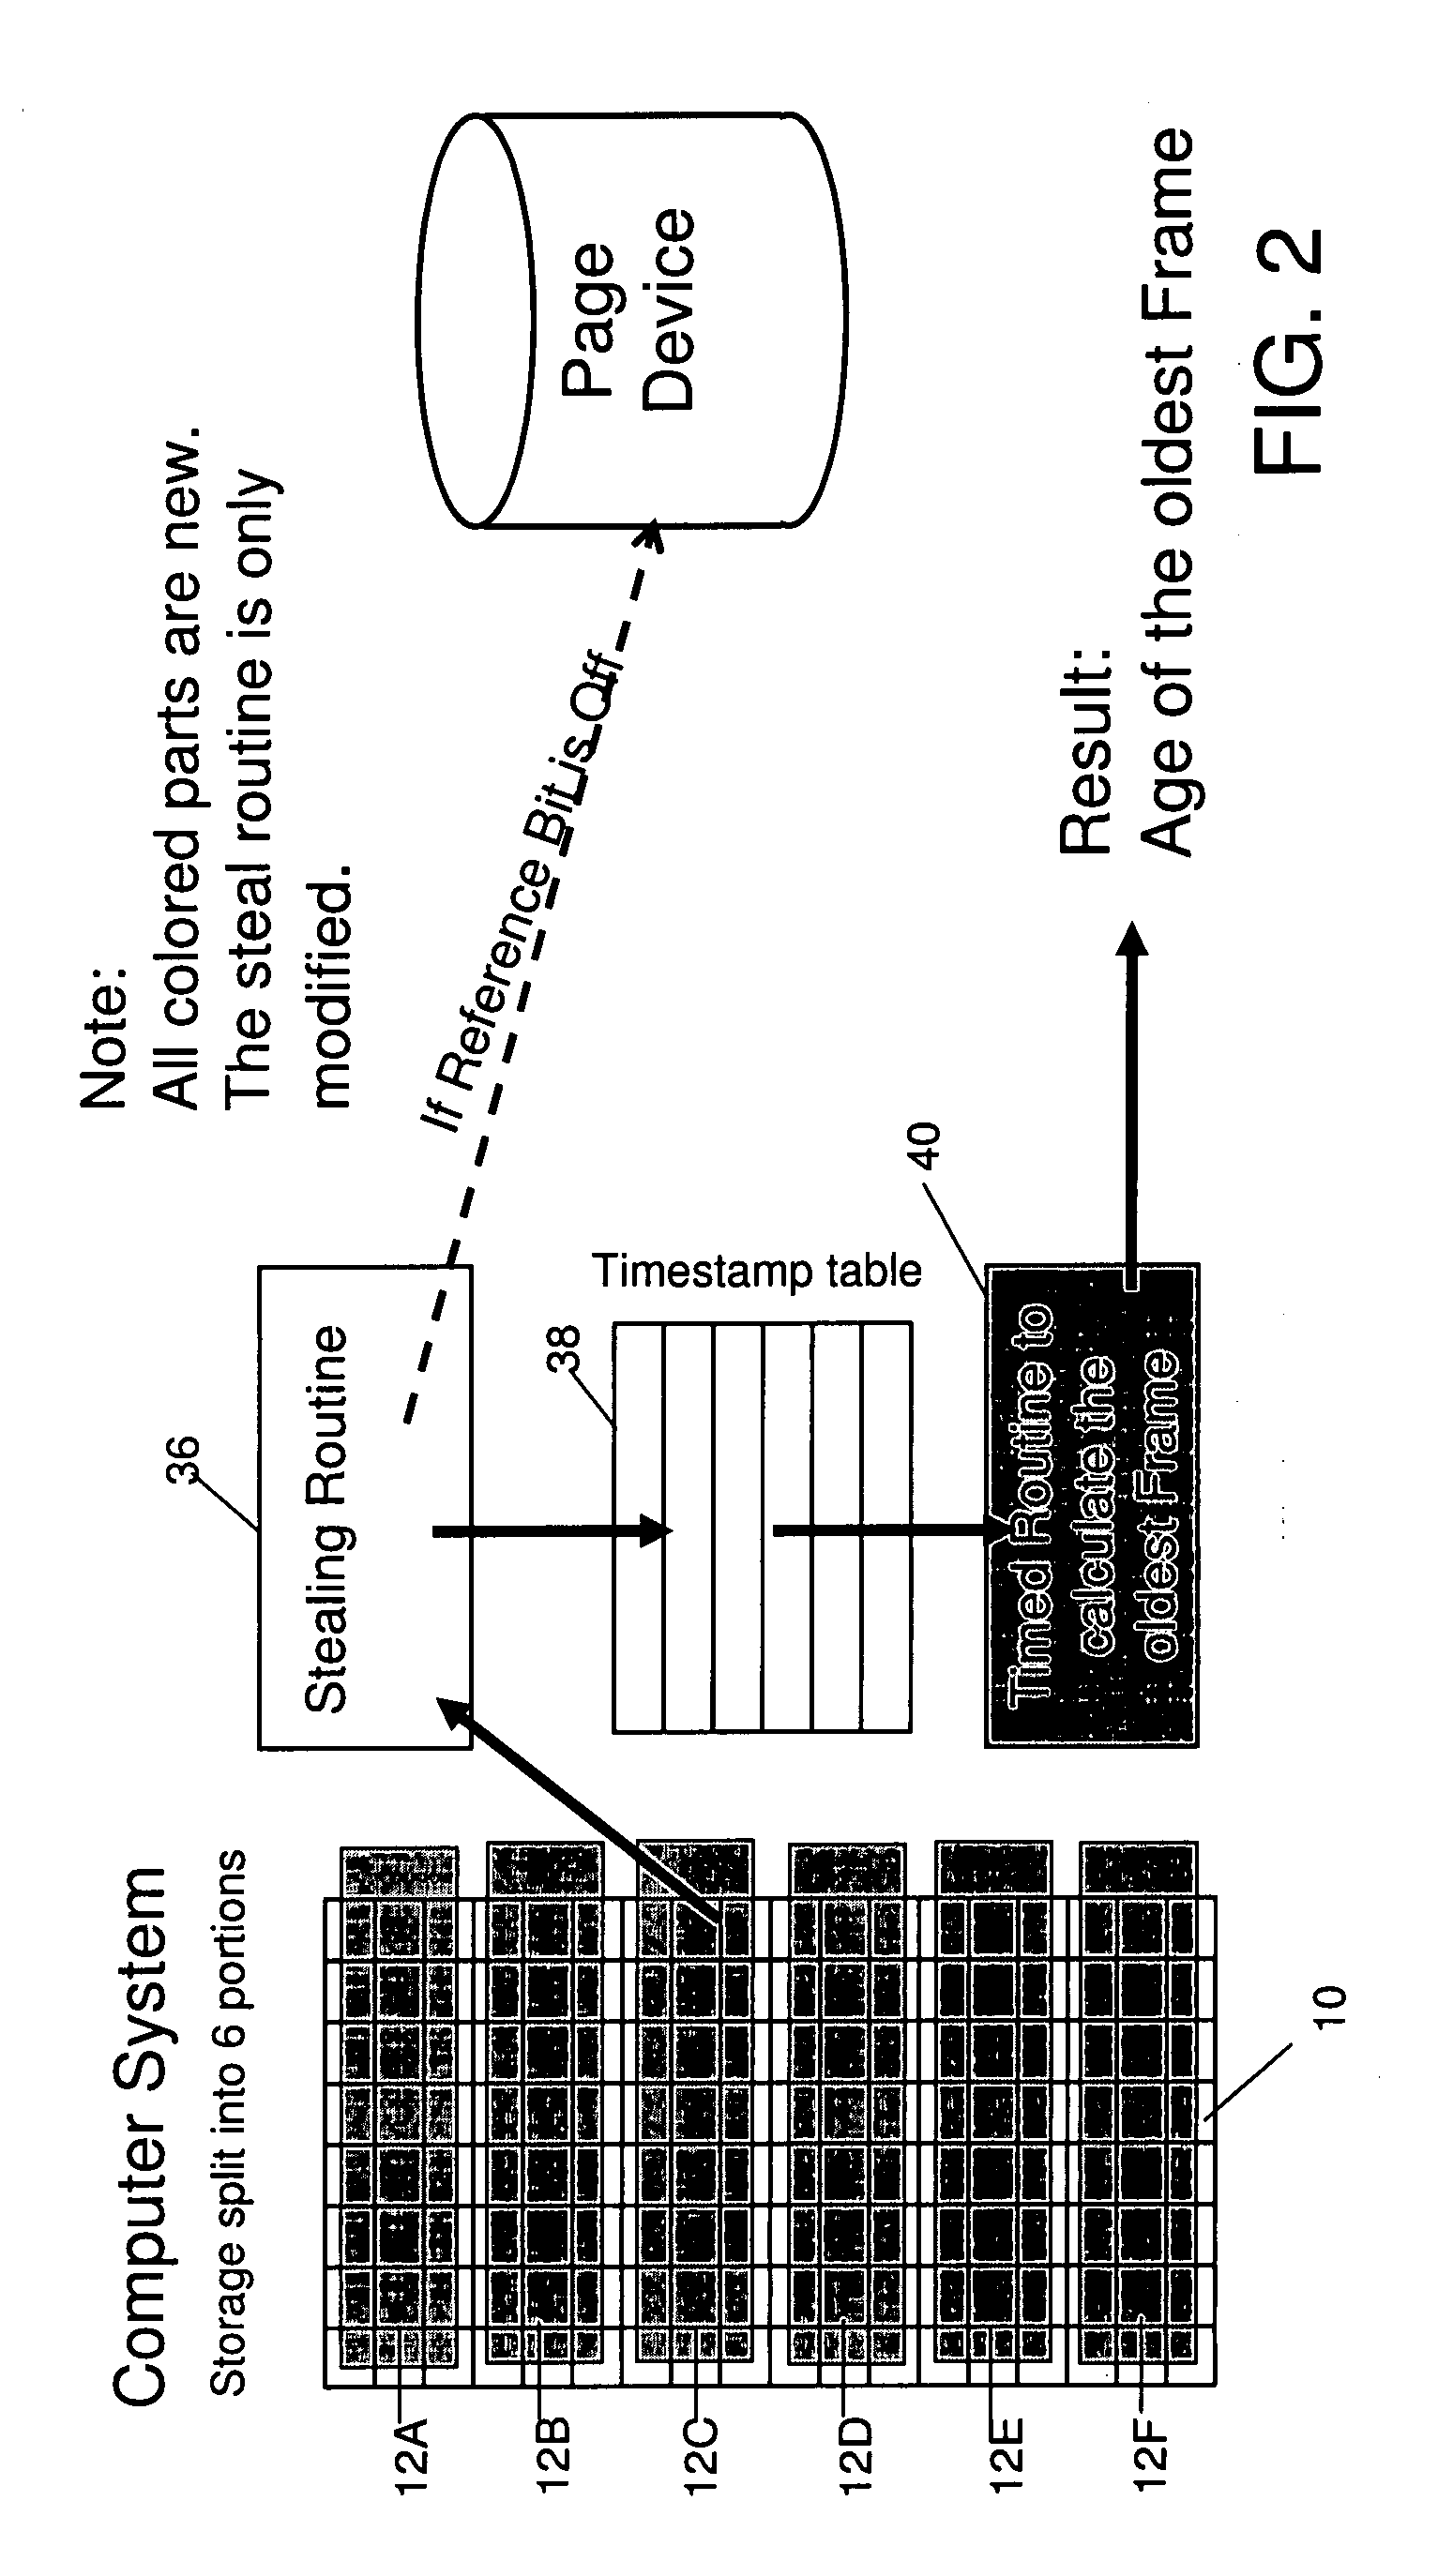 Determination of the frame age in a large real storage environment